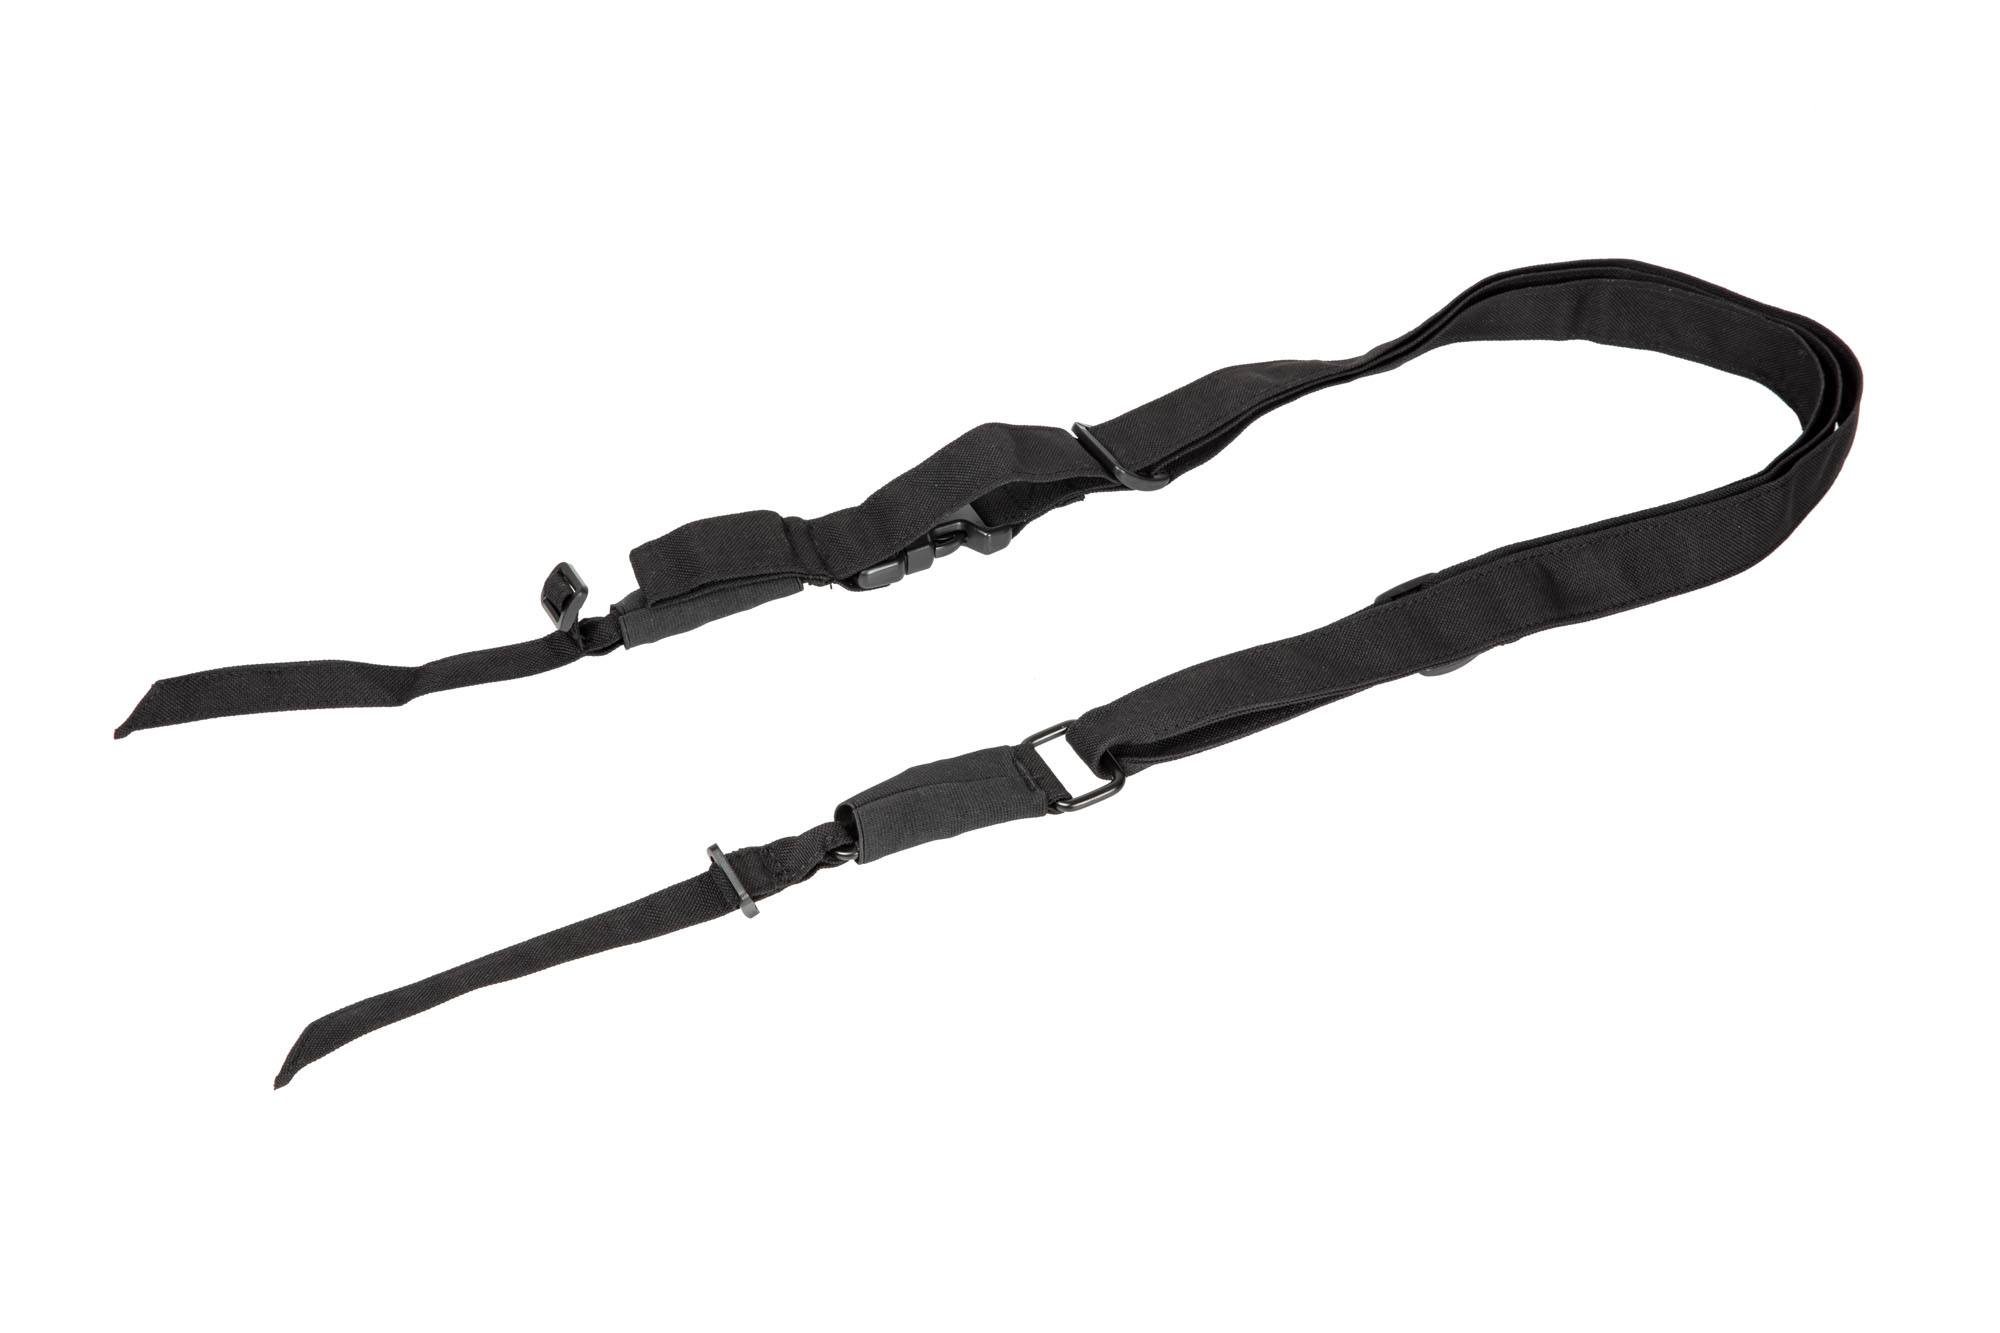 Three-Point Specna Arms II Tactical Sling - Black by Specna Arms on Airsoft Mania Europe